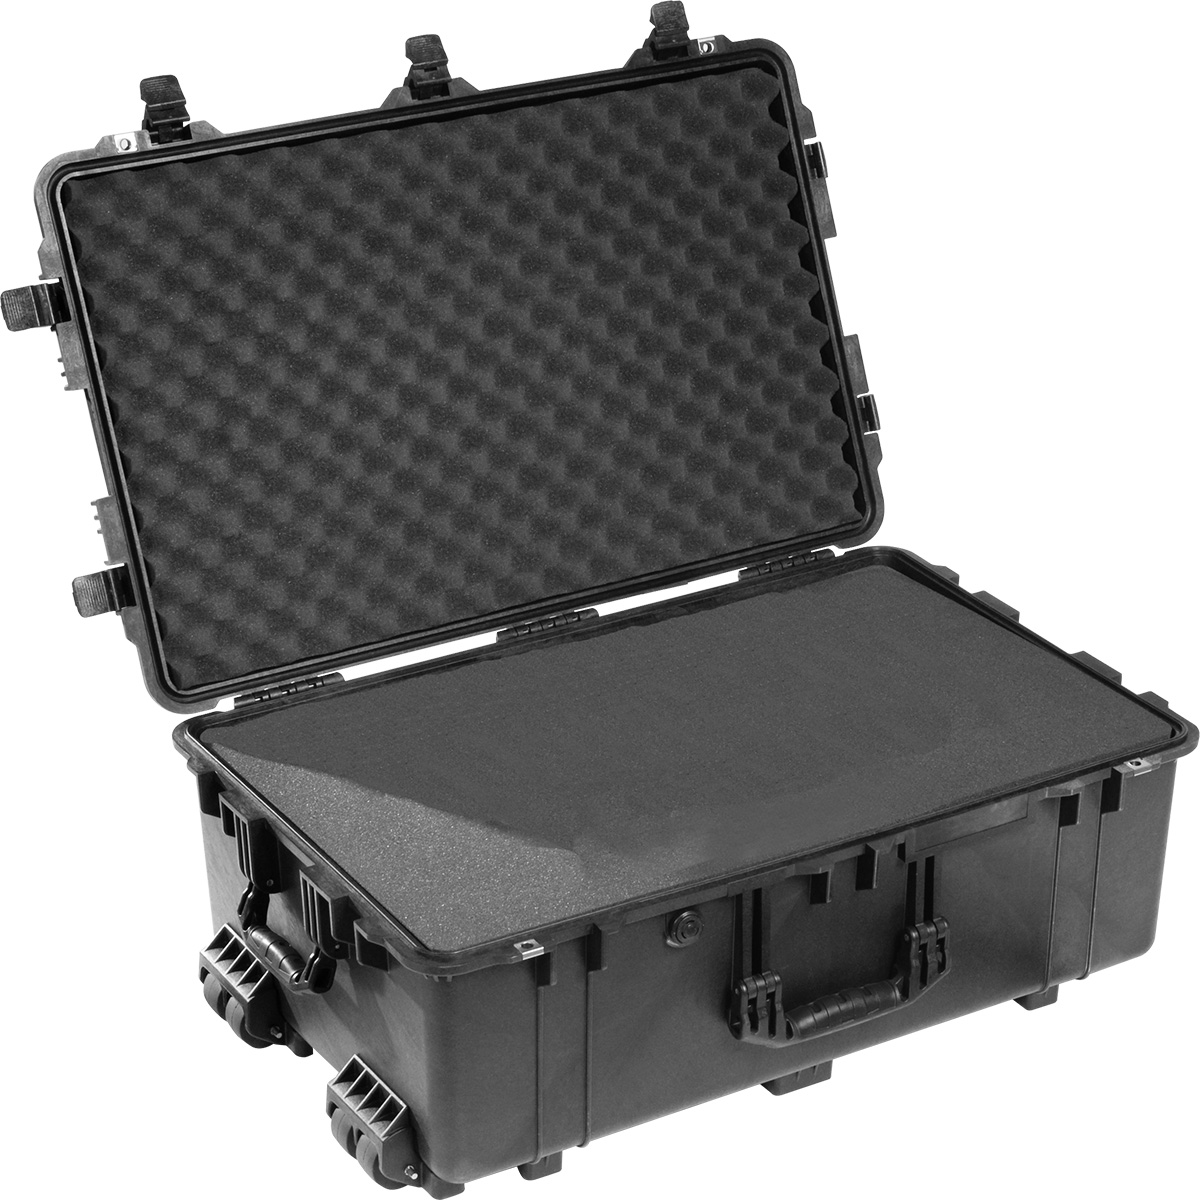 Pelican 1650 Protector Case from Columbia Safety